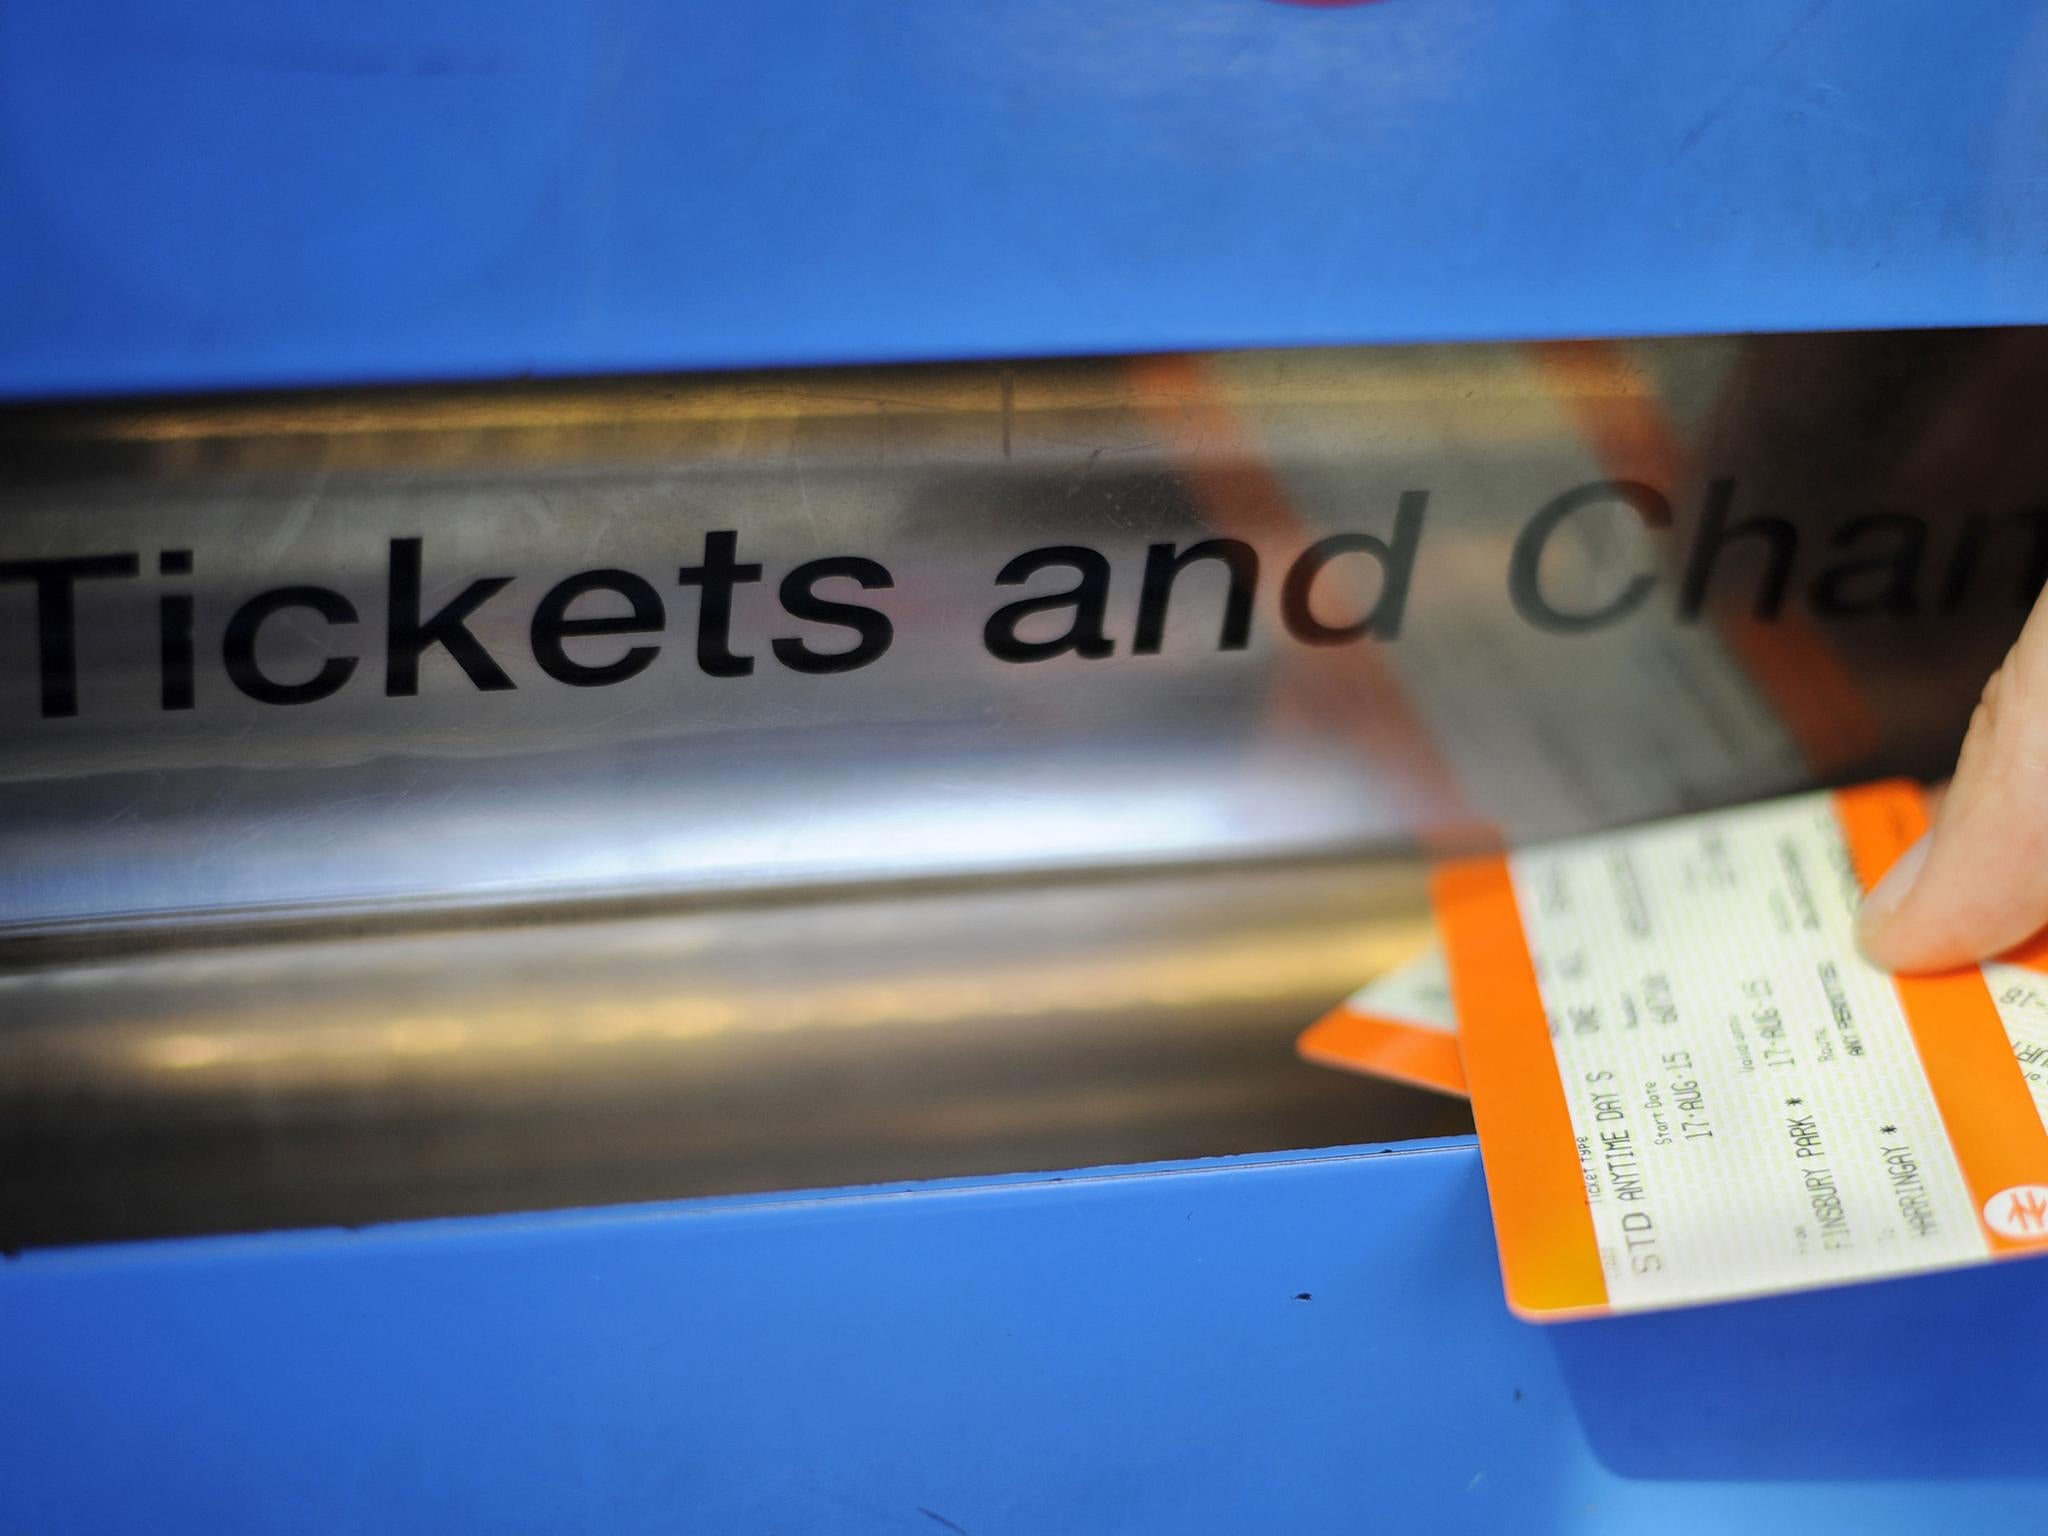 Collecting your tickets at a station is a safer bet than printing them at home